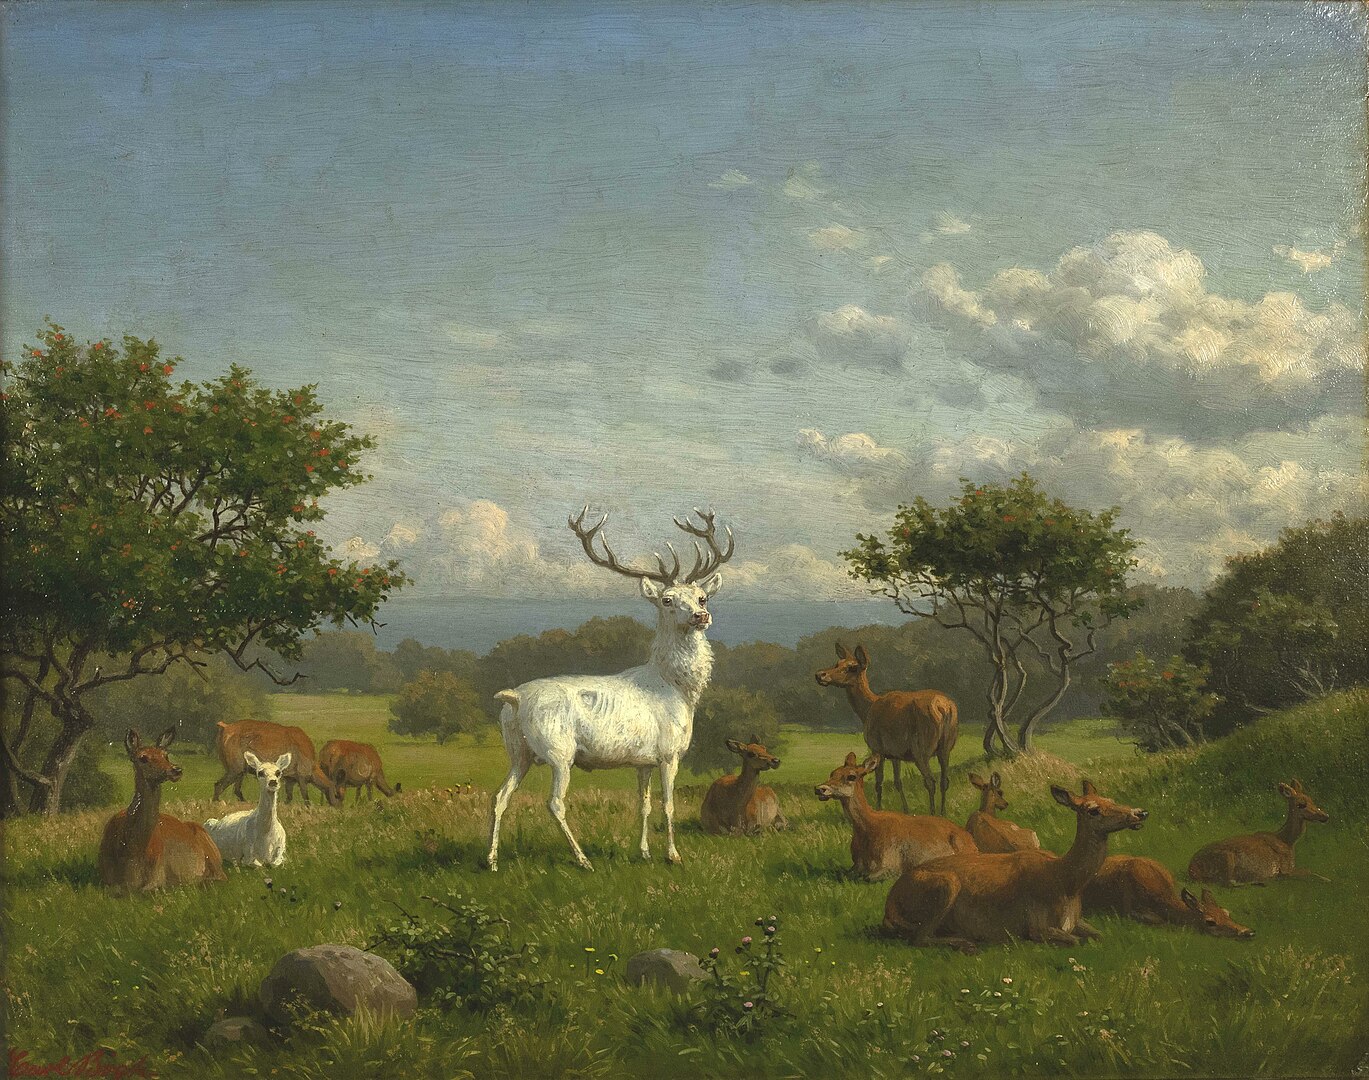 A white stag stands in a vast field and is surrounded by a pack of deer.